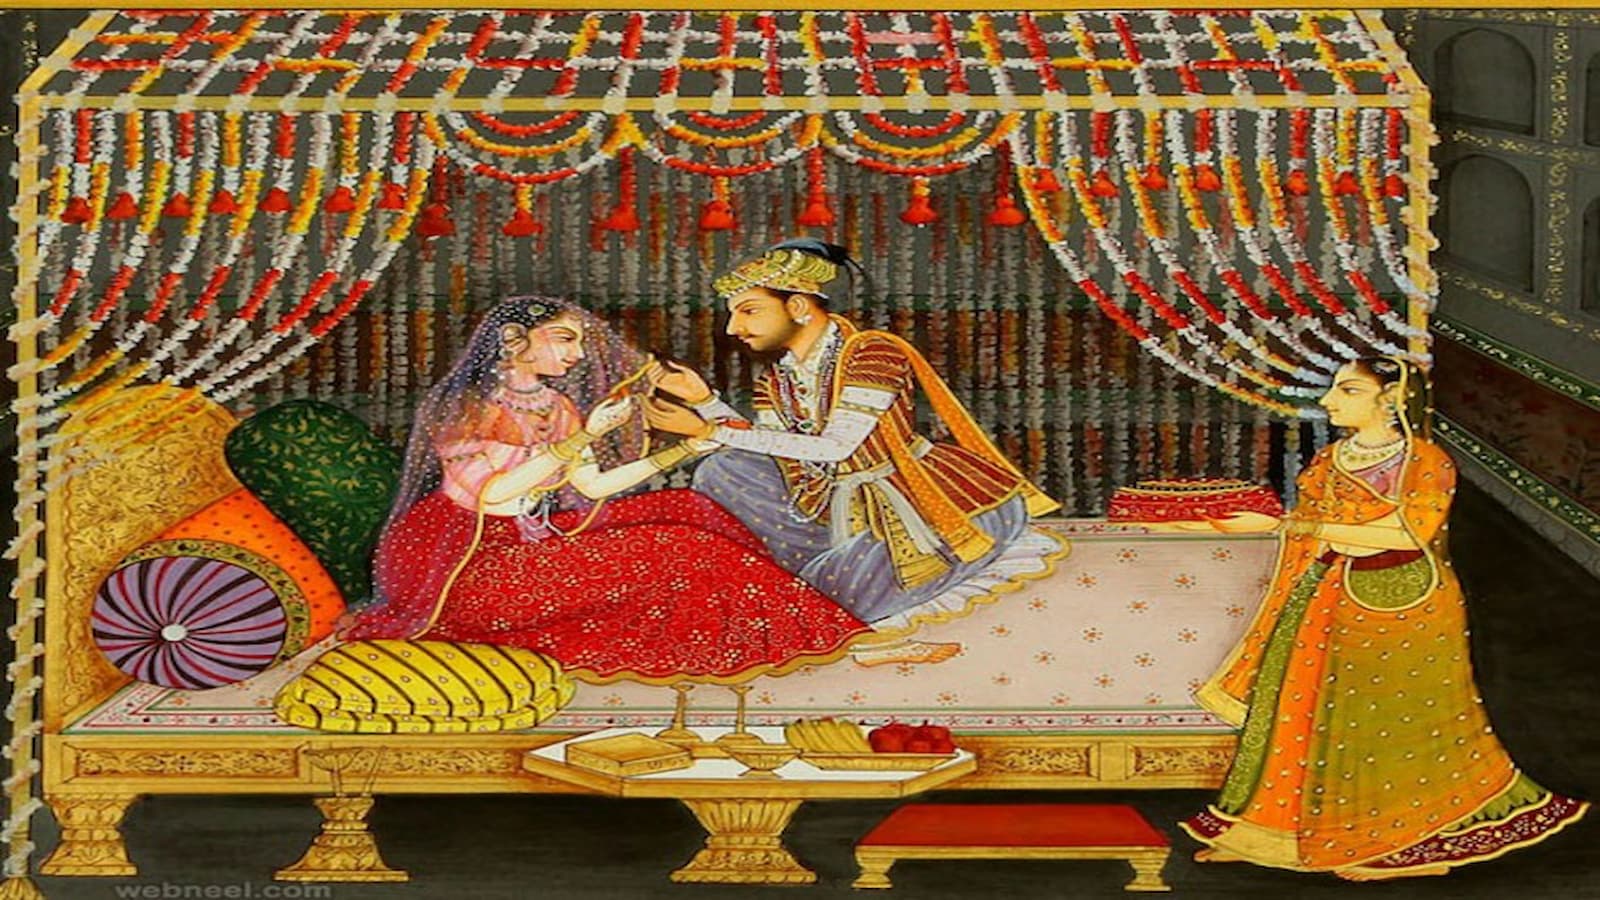 The Mughal – Rajput Marriages